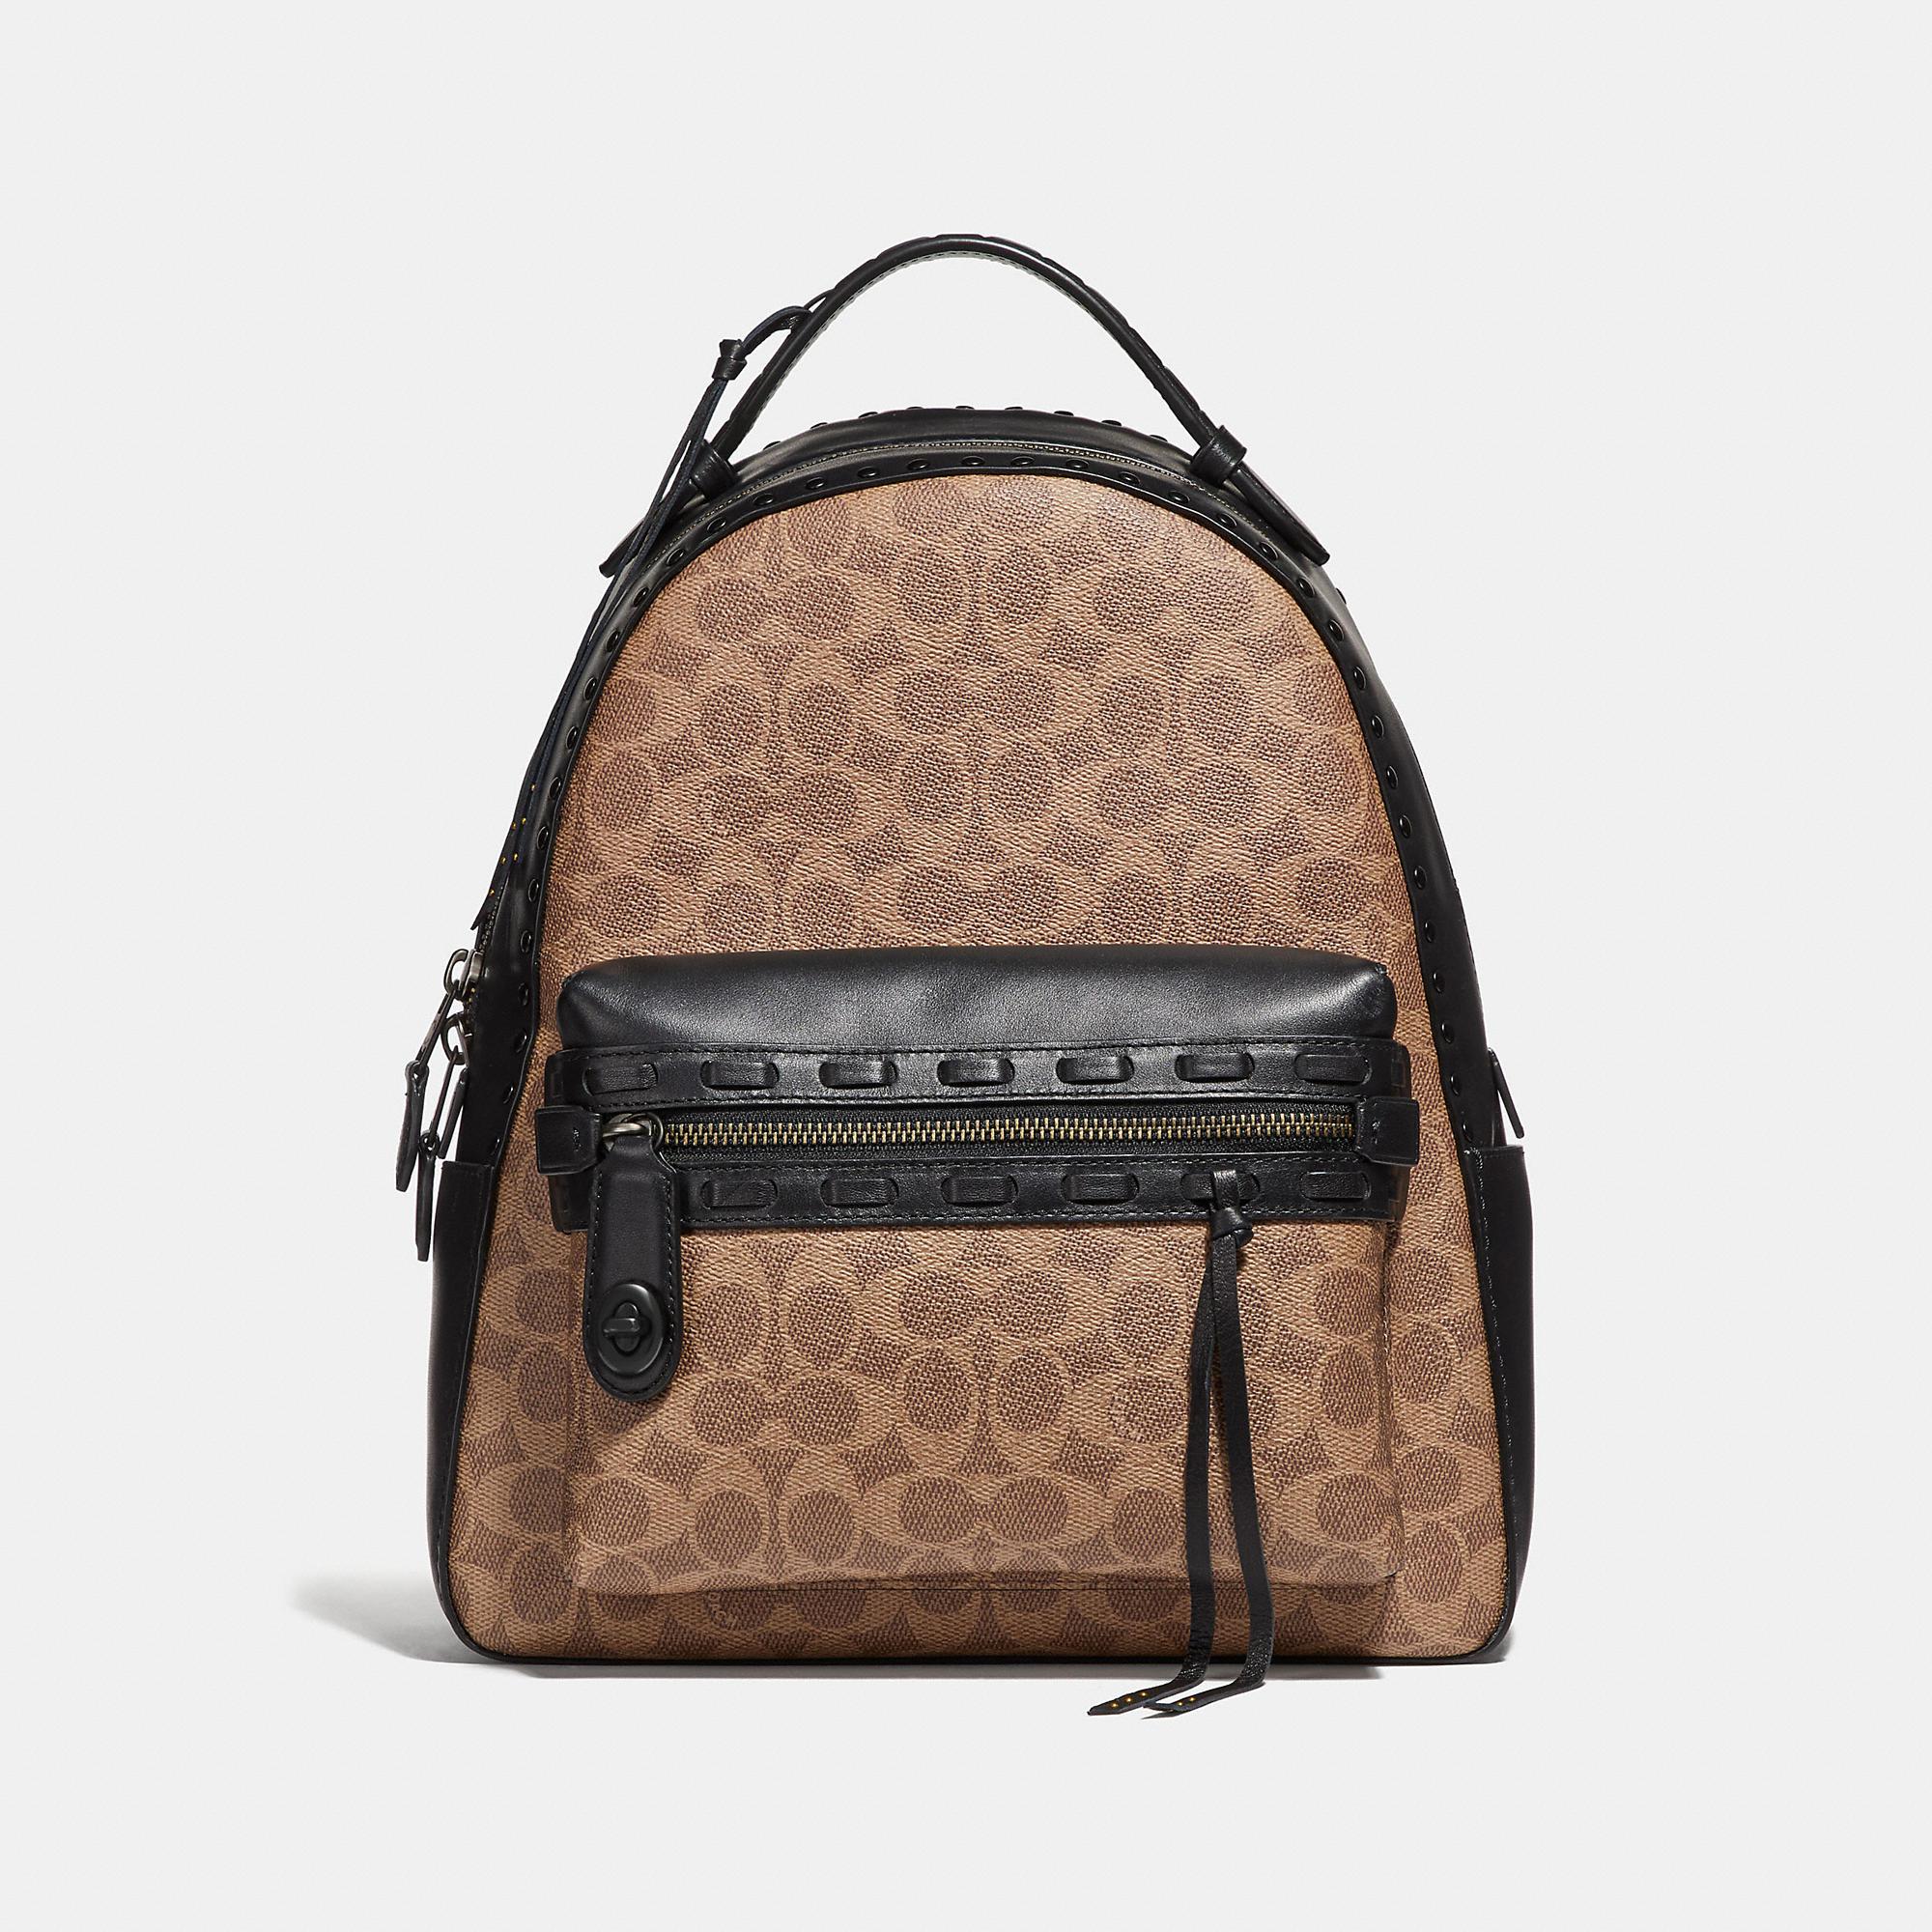 Lyst - Coach Campus Backpack In Signature Canvas With Whipstitch in Black